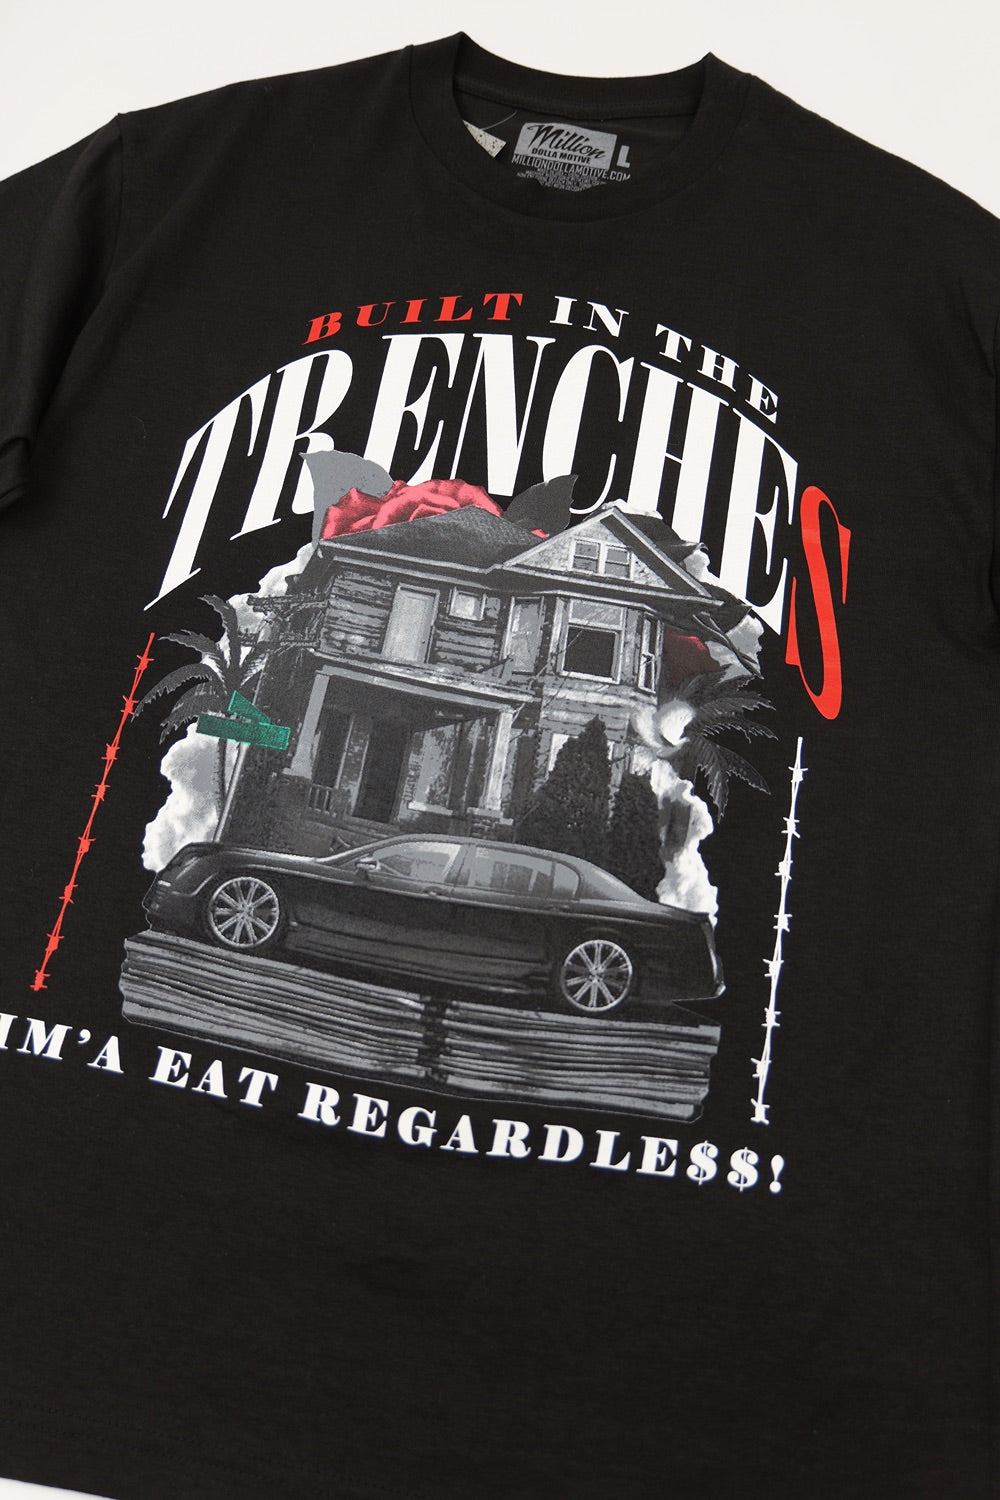 Graphic Tees - Built In The Trenches T - Shirts